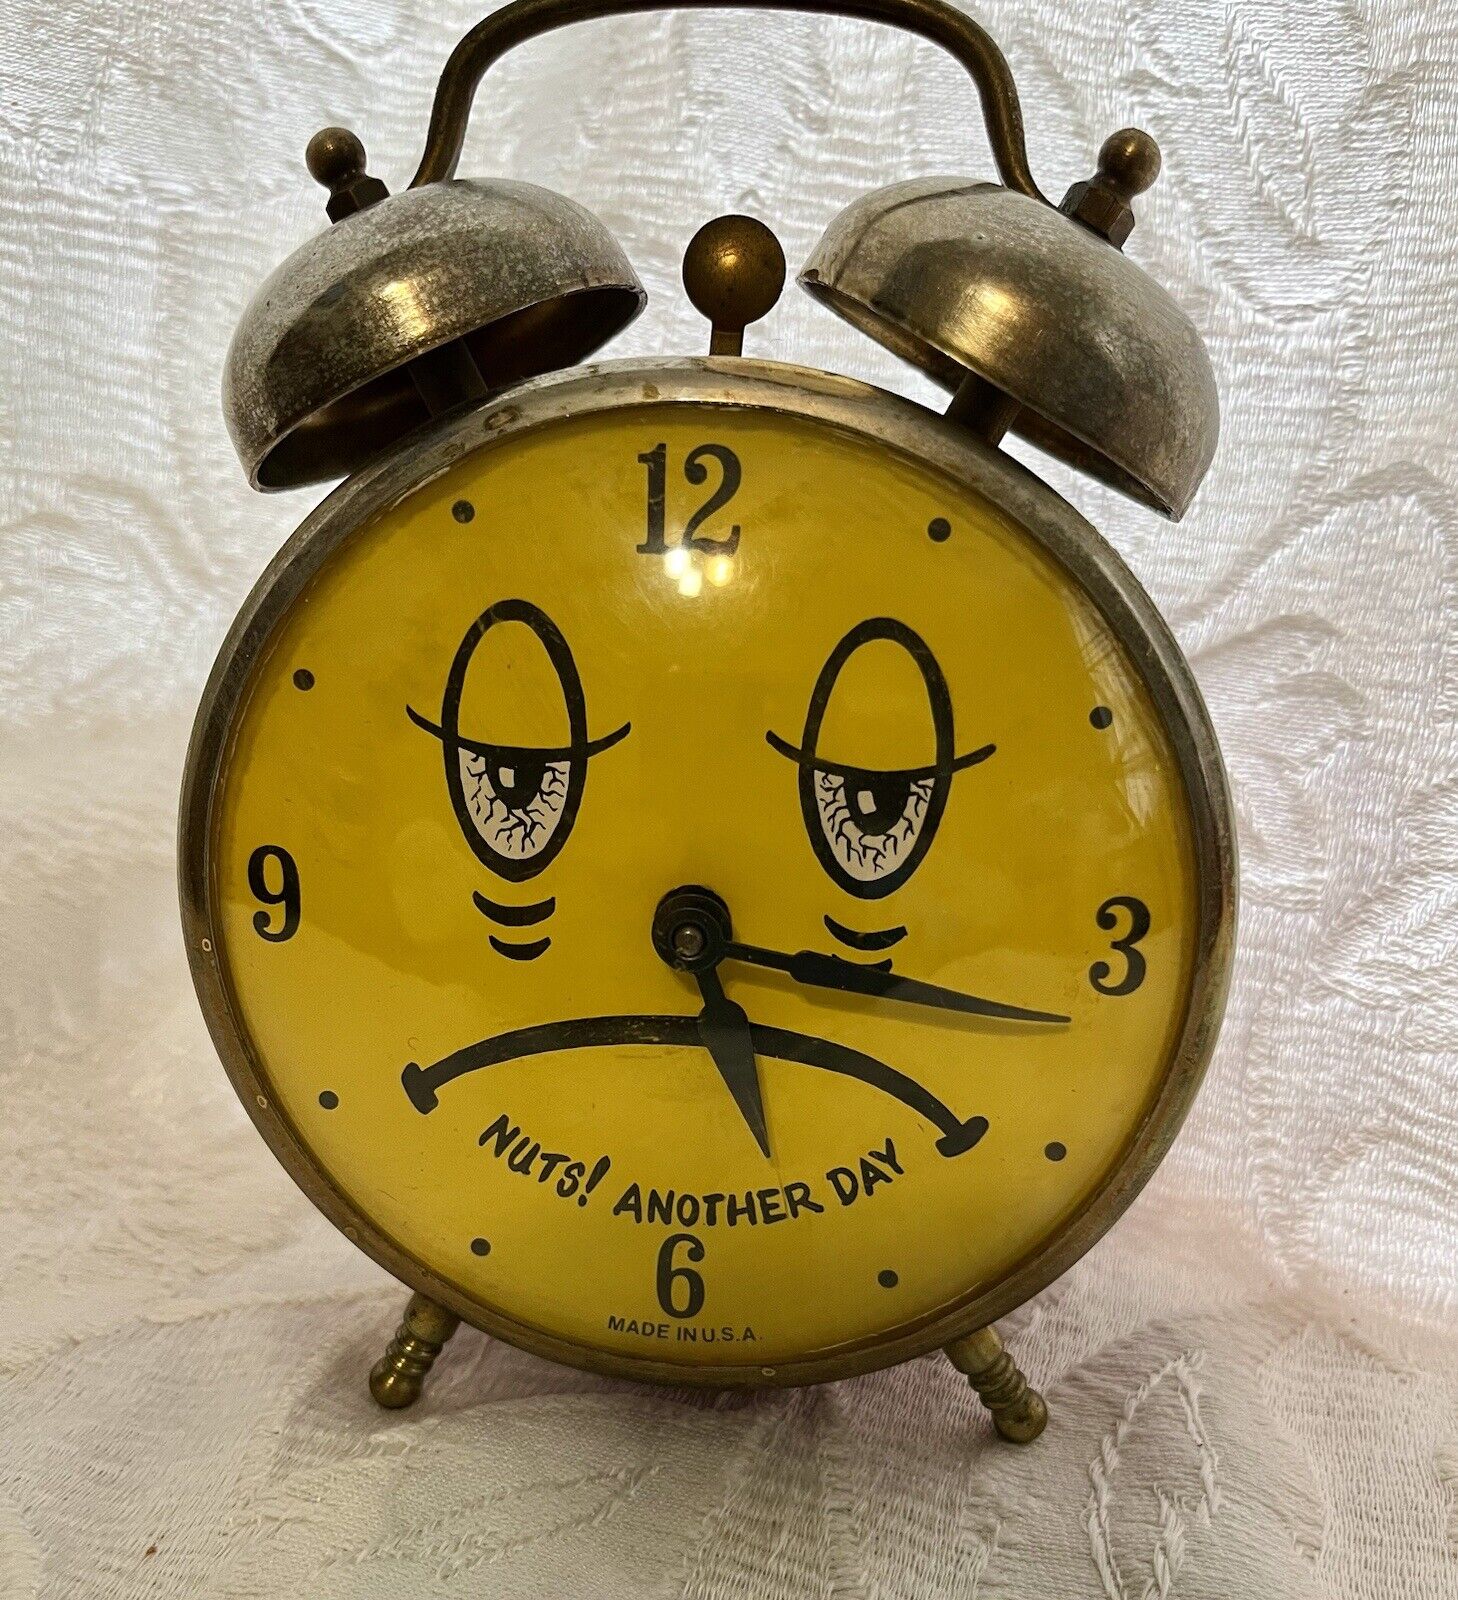 Vintage Robert Shaw Lux Time Nuts Another Day 2 Bell Metal Alarm Clock